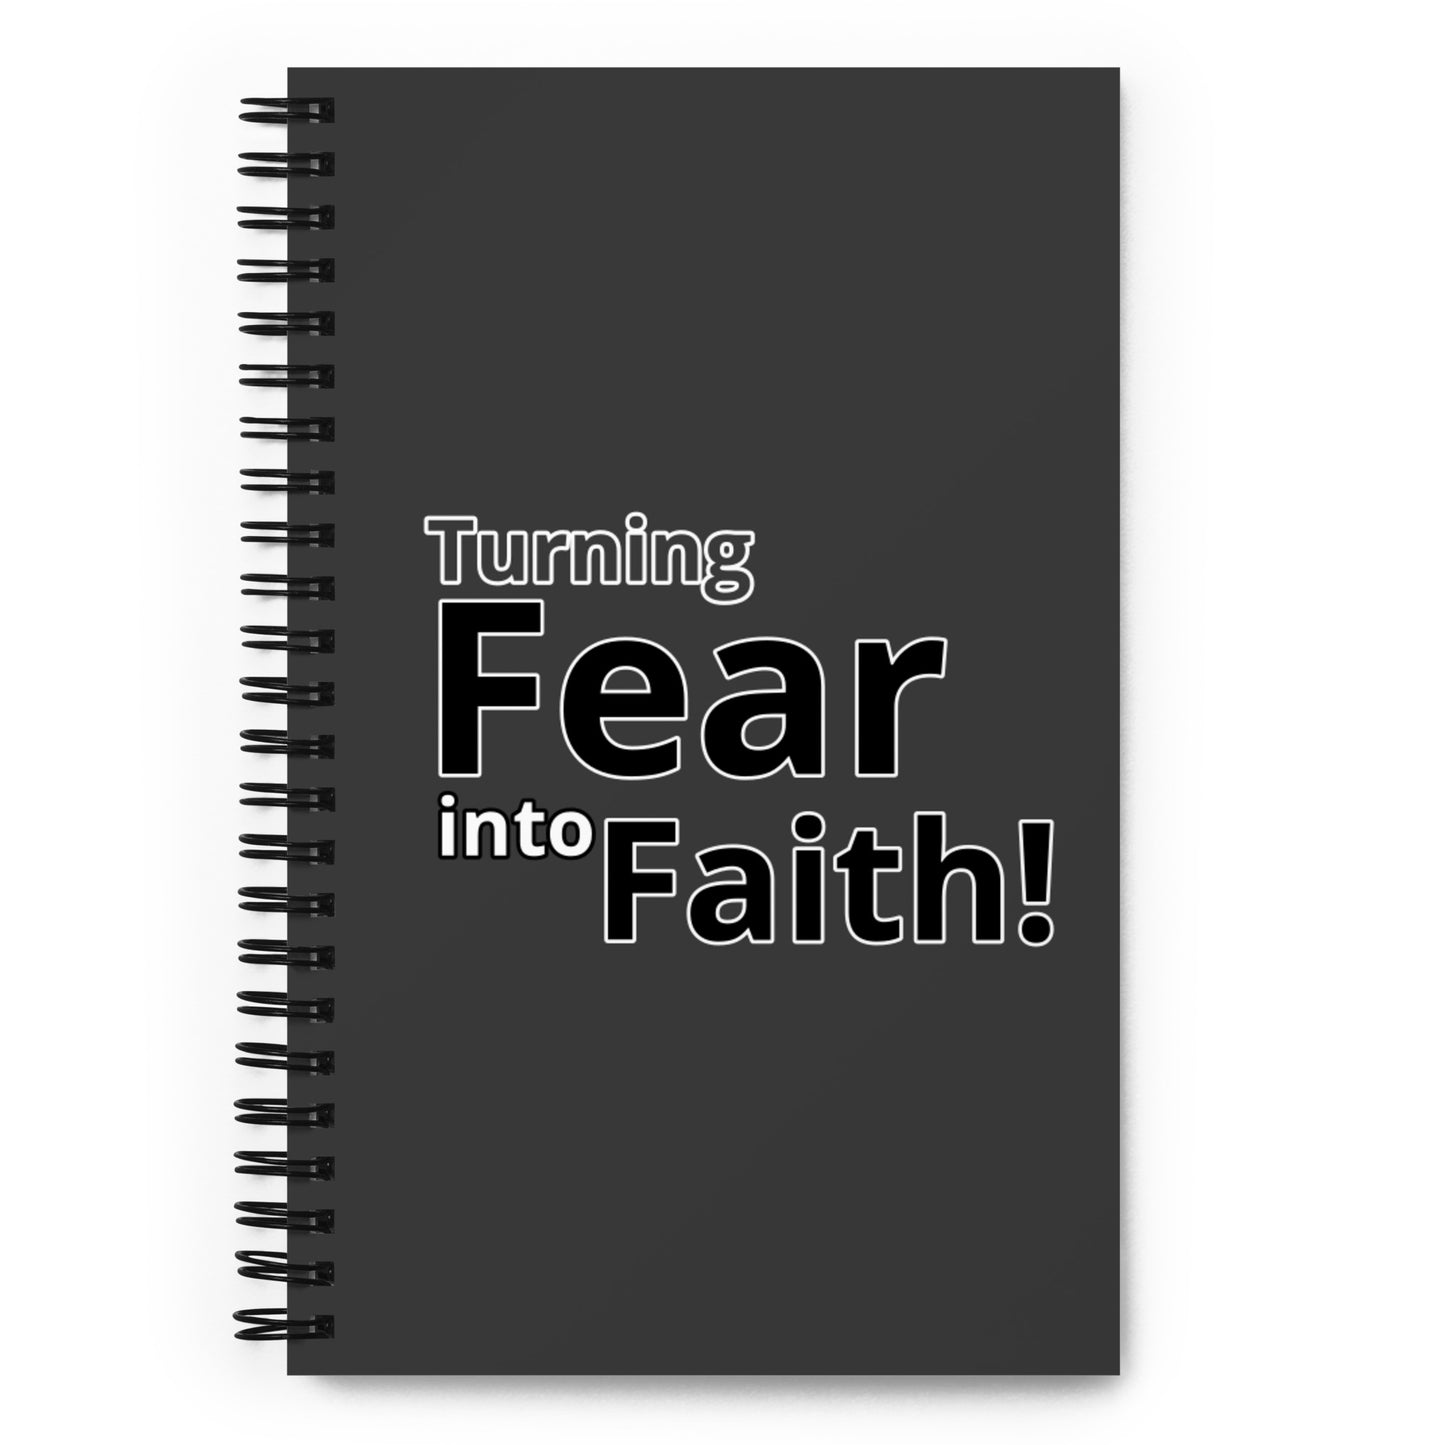 Turning Fear Into Faith! Spiral notebook